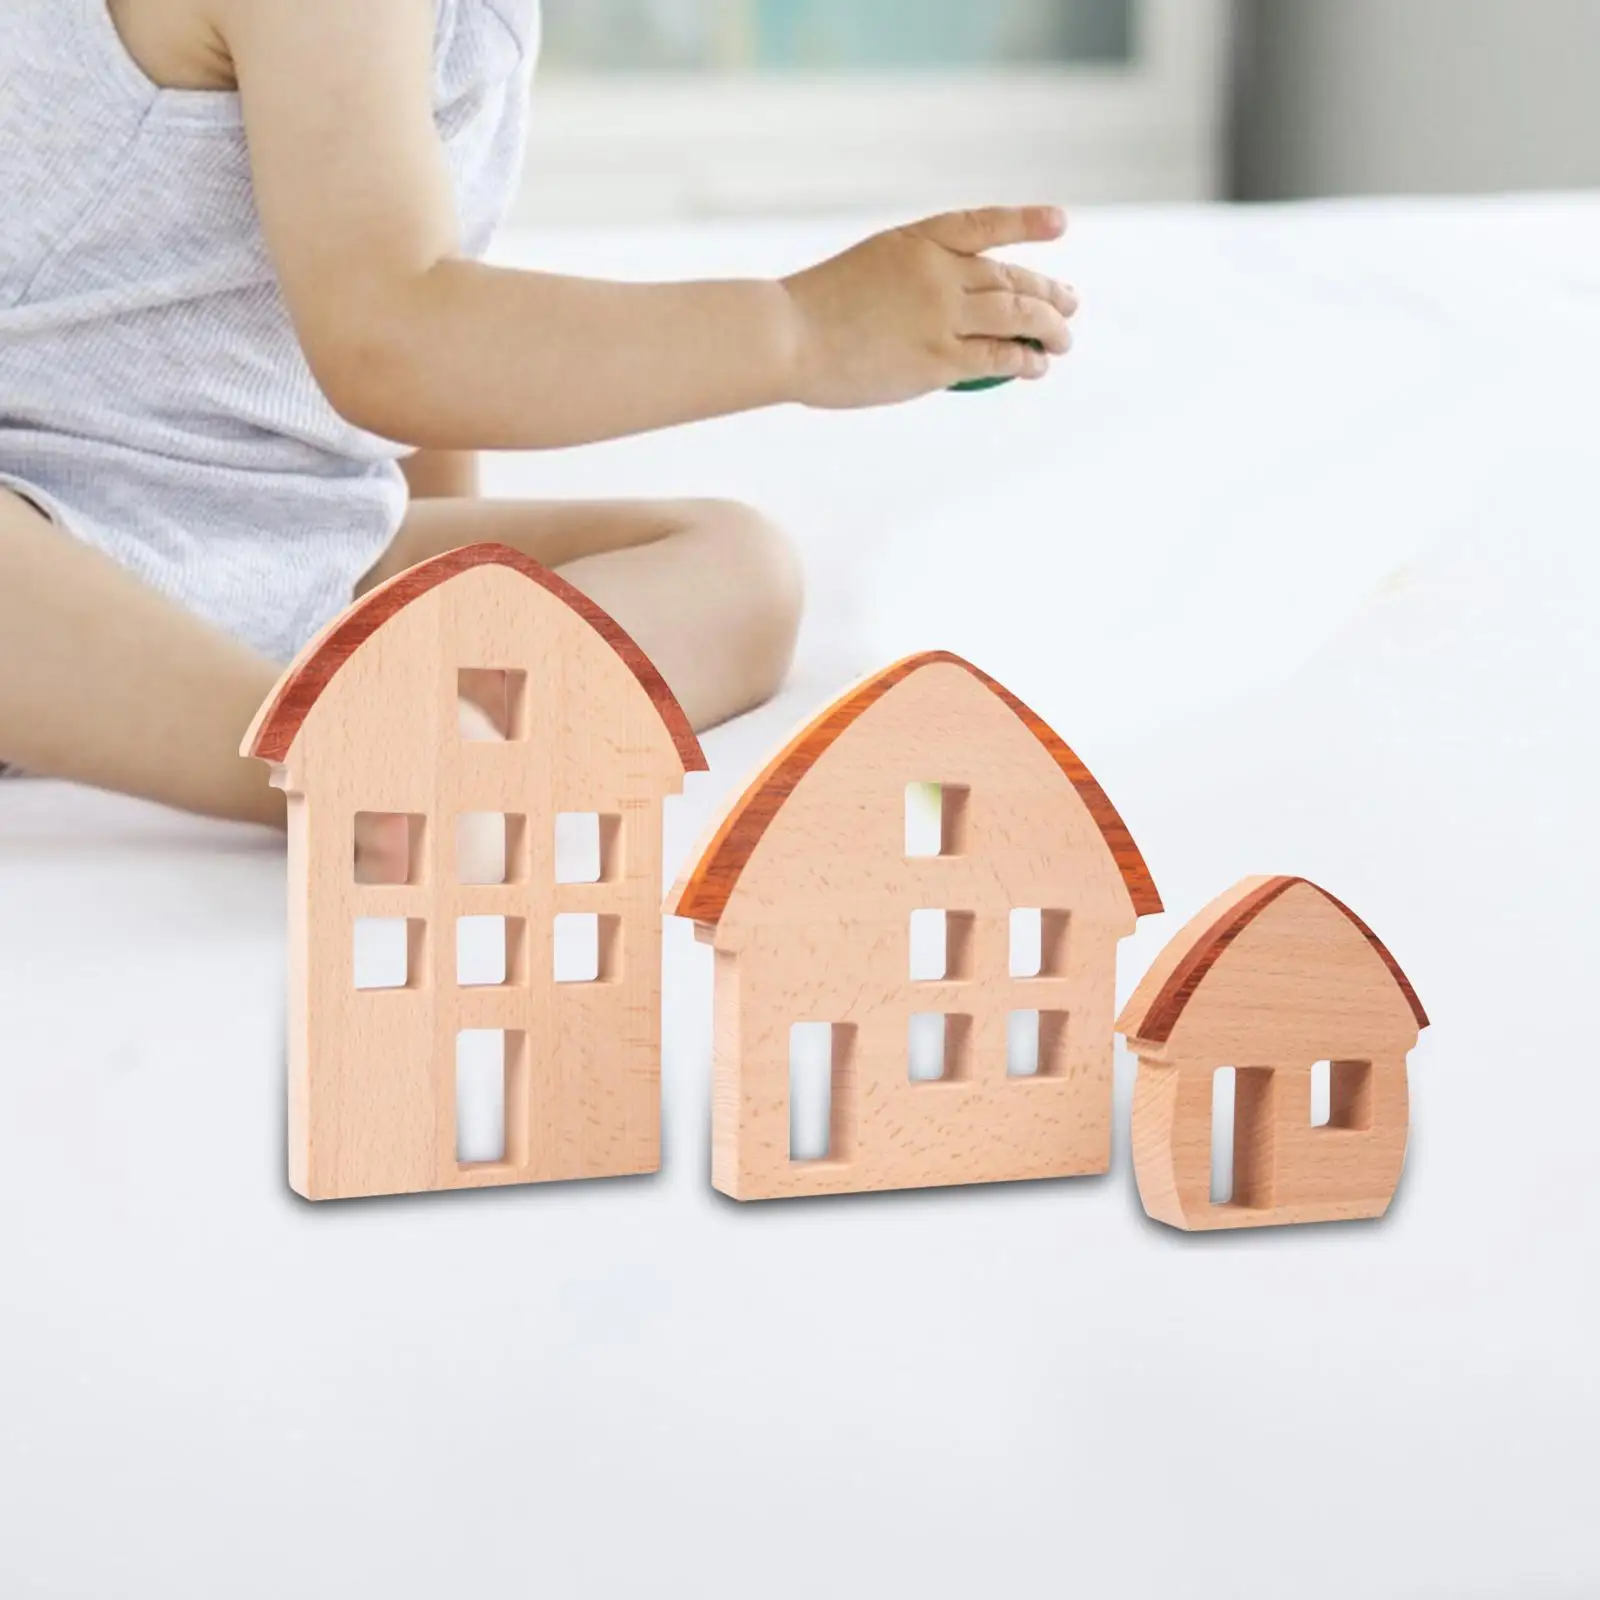 3Pcs Wood House Wood Wooden Sign Block for Boys Girls Party Favors Ages 3-6